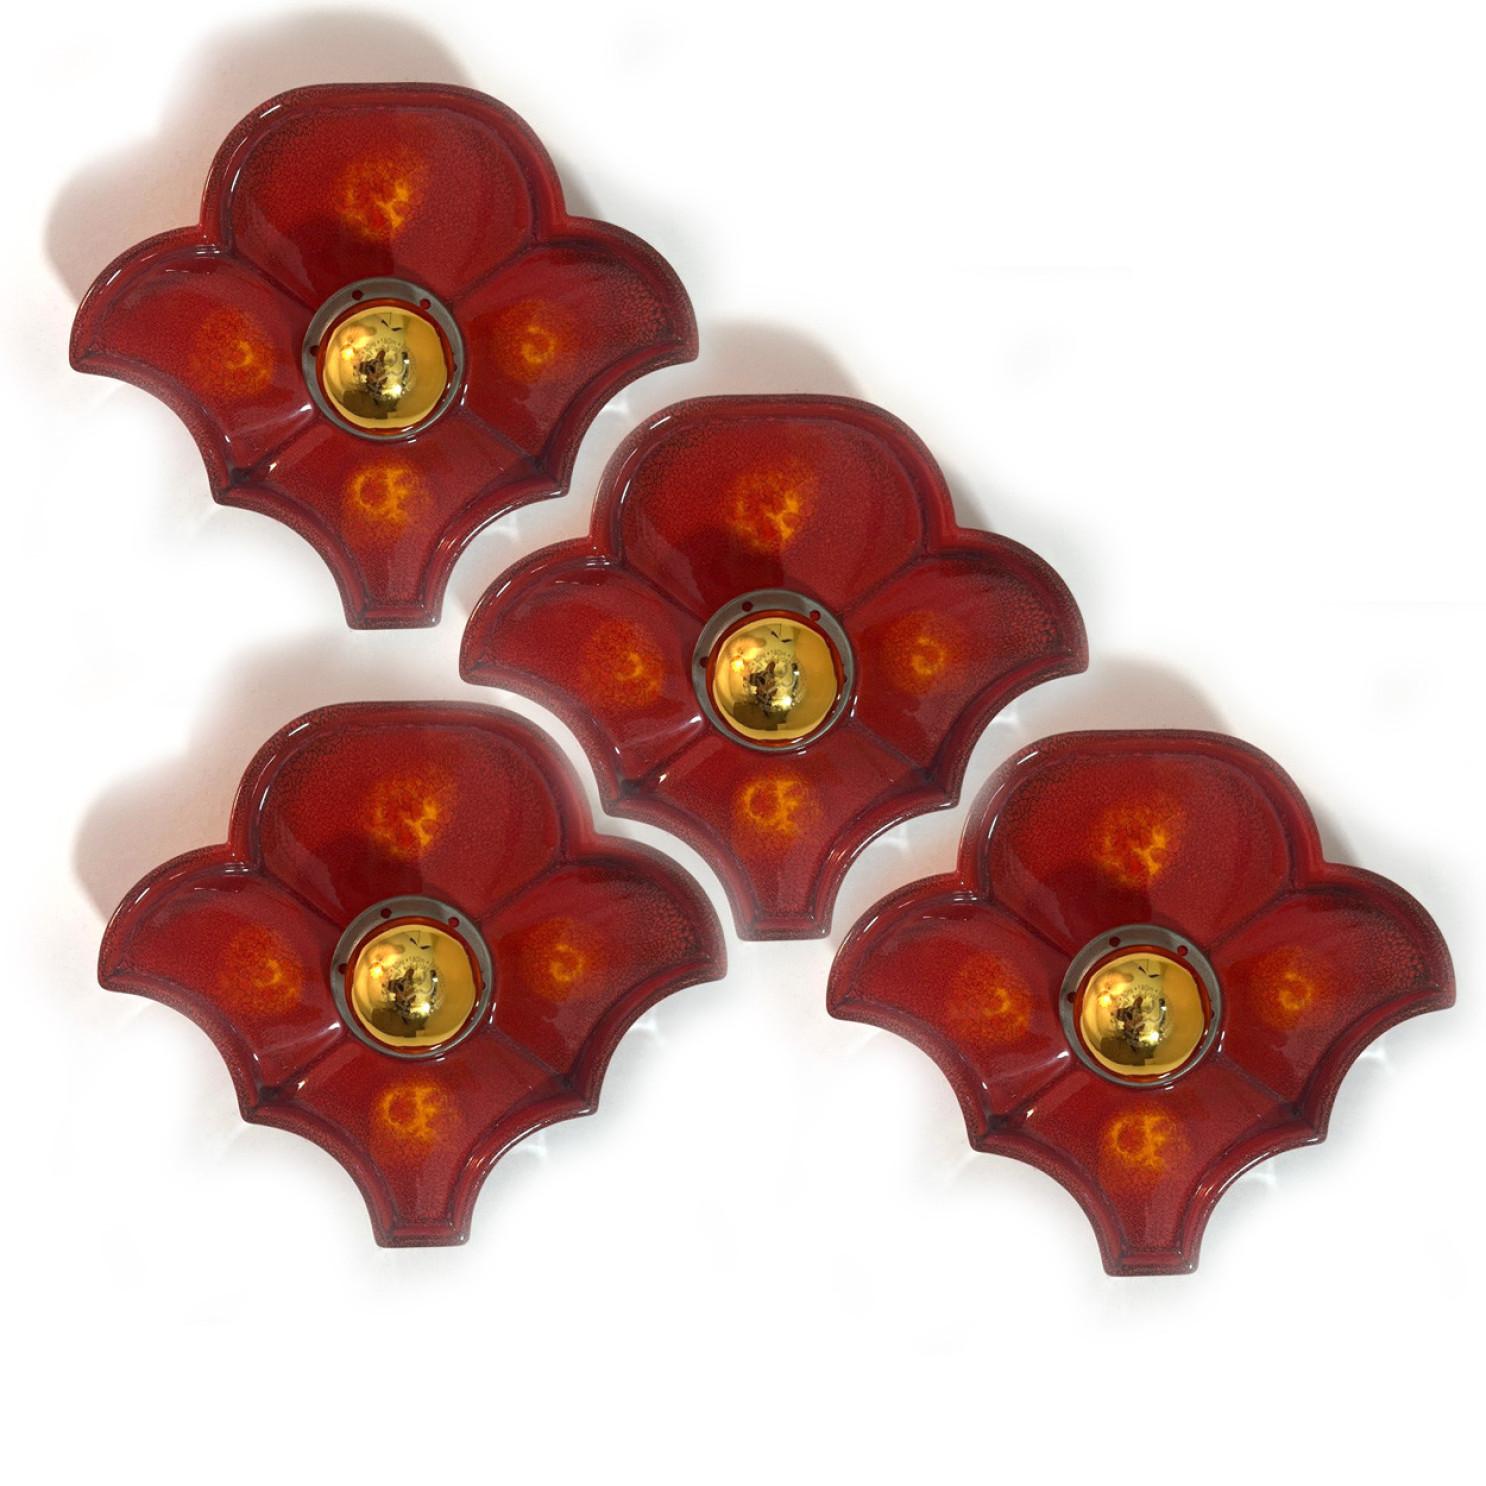 Several Flower Red Ceramic Wall Lights by Hustadt Keramik, Germany, 1970 For Sale 8